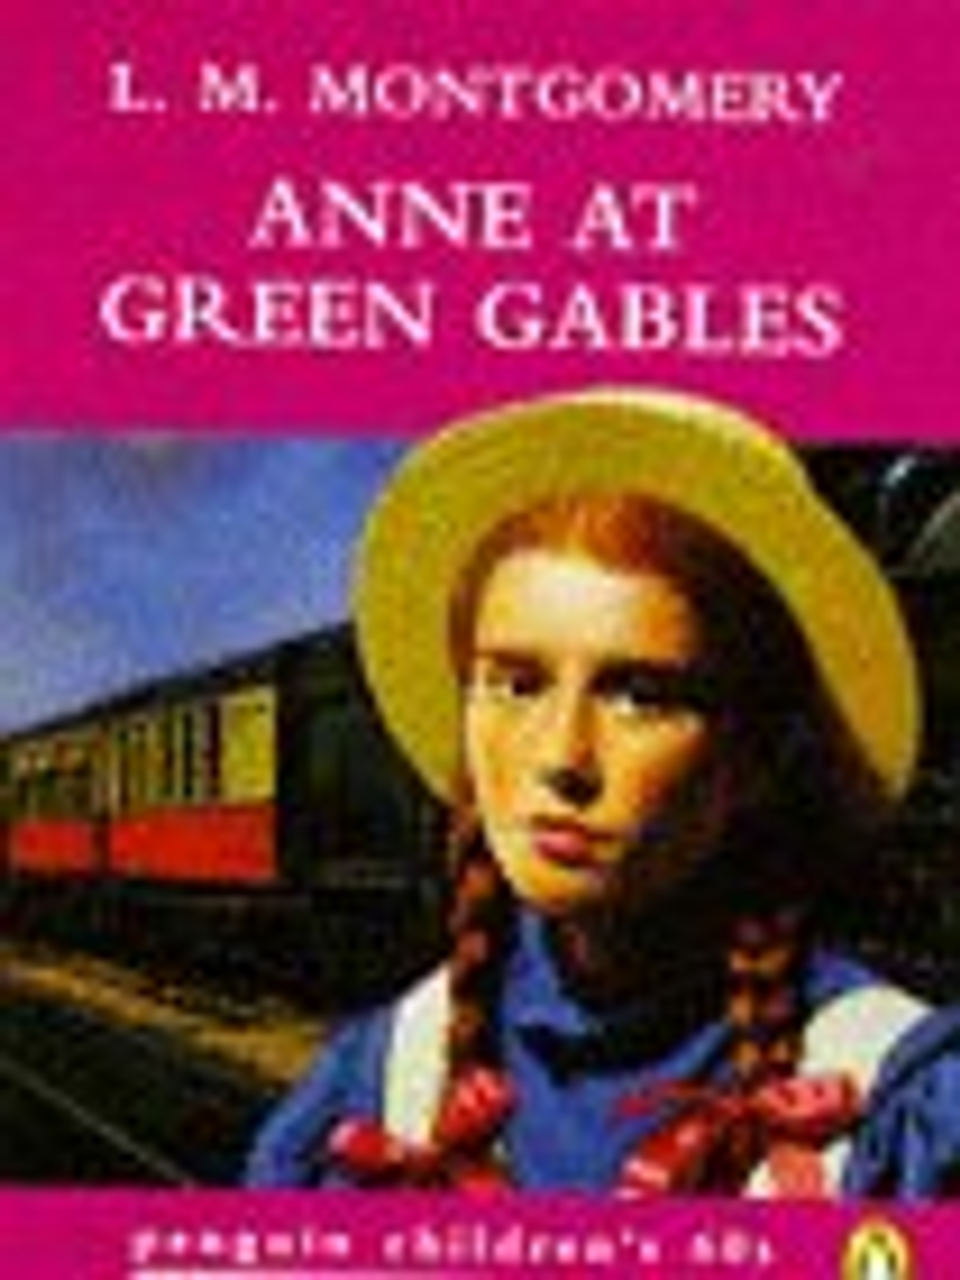 L.M. Montgomery / Anne at Green Gables